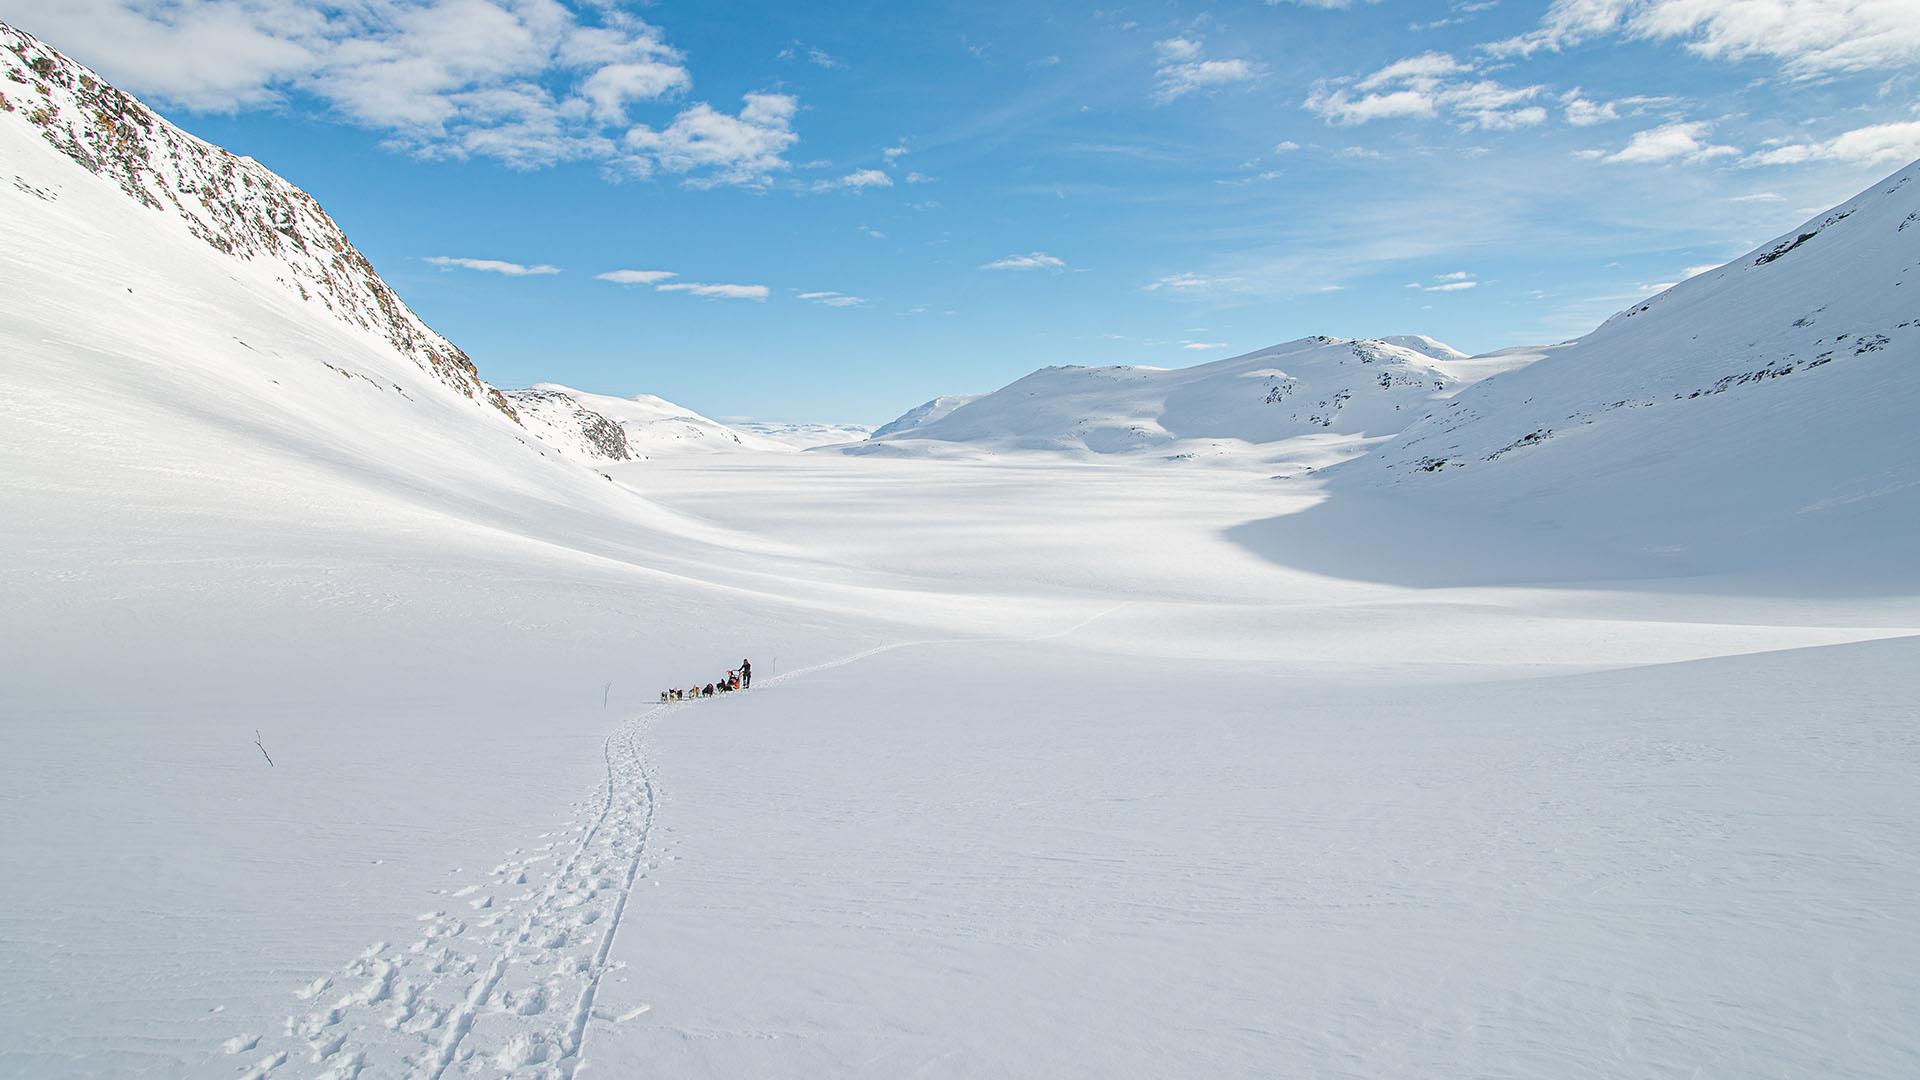 Two tiny dog sledding teams in a wide and mighty vinter mountain landscape